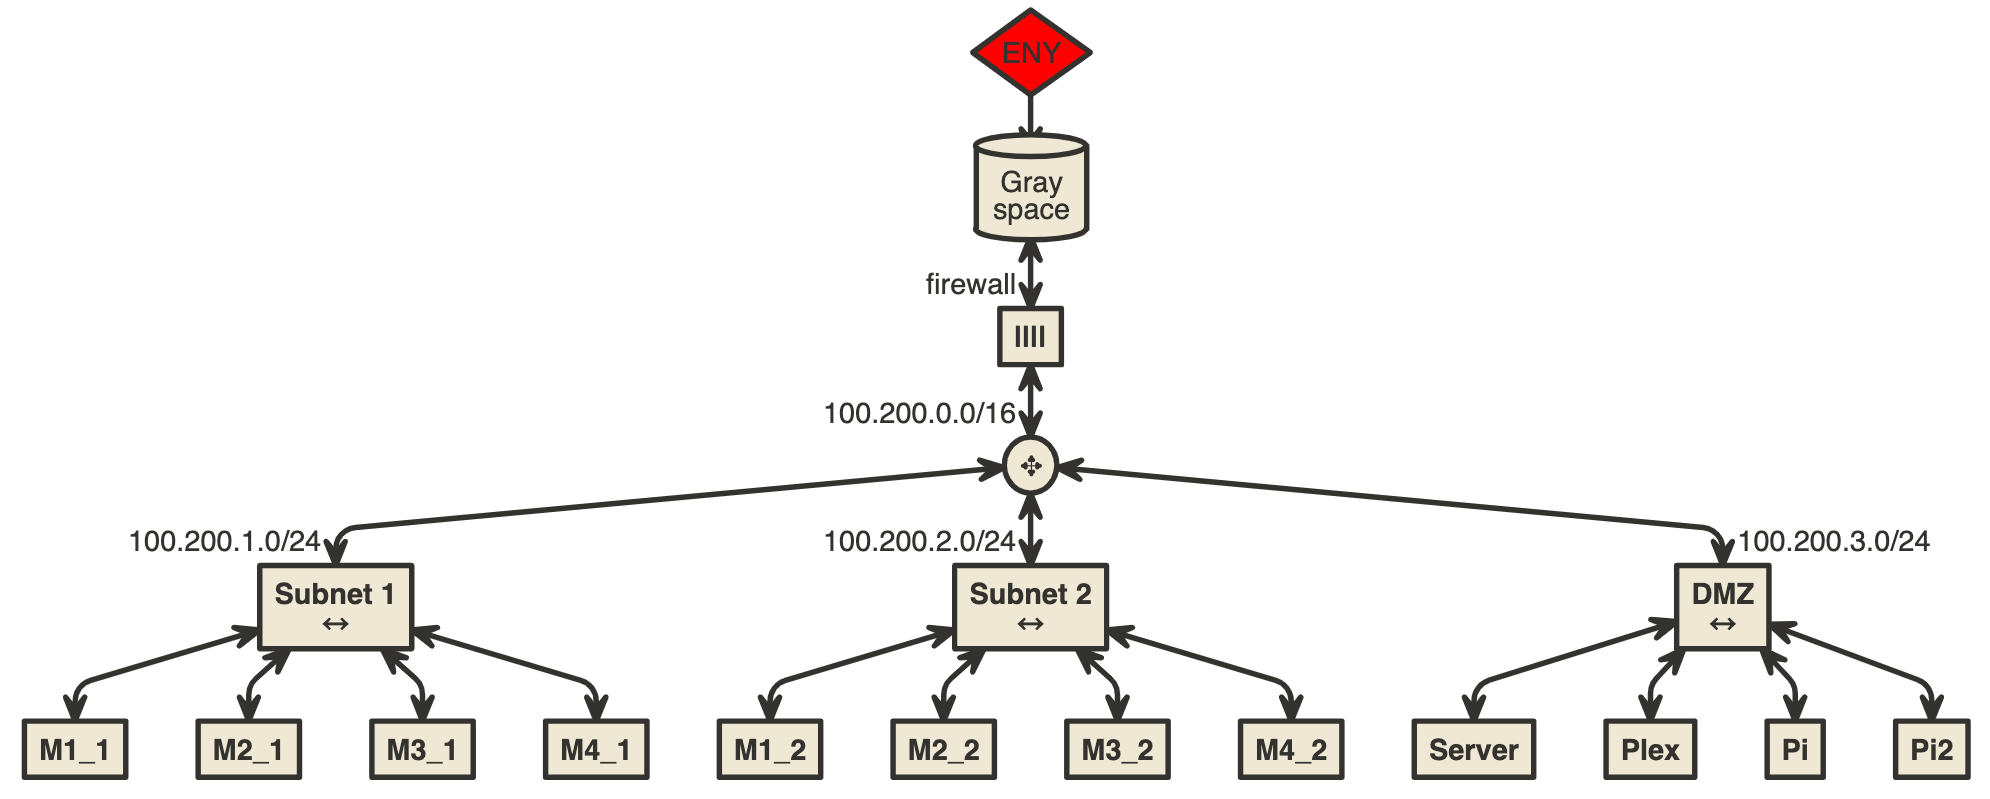 Example network diagram created with nomnoml